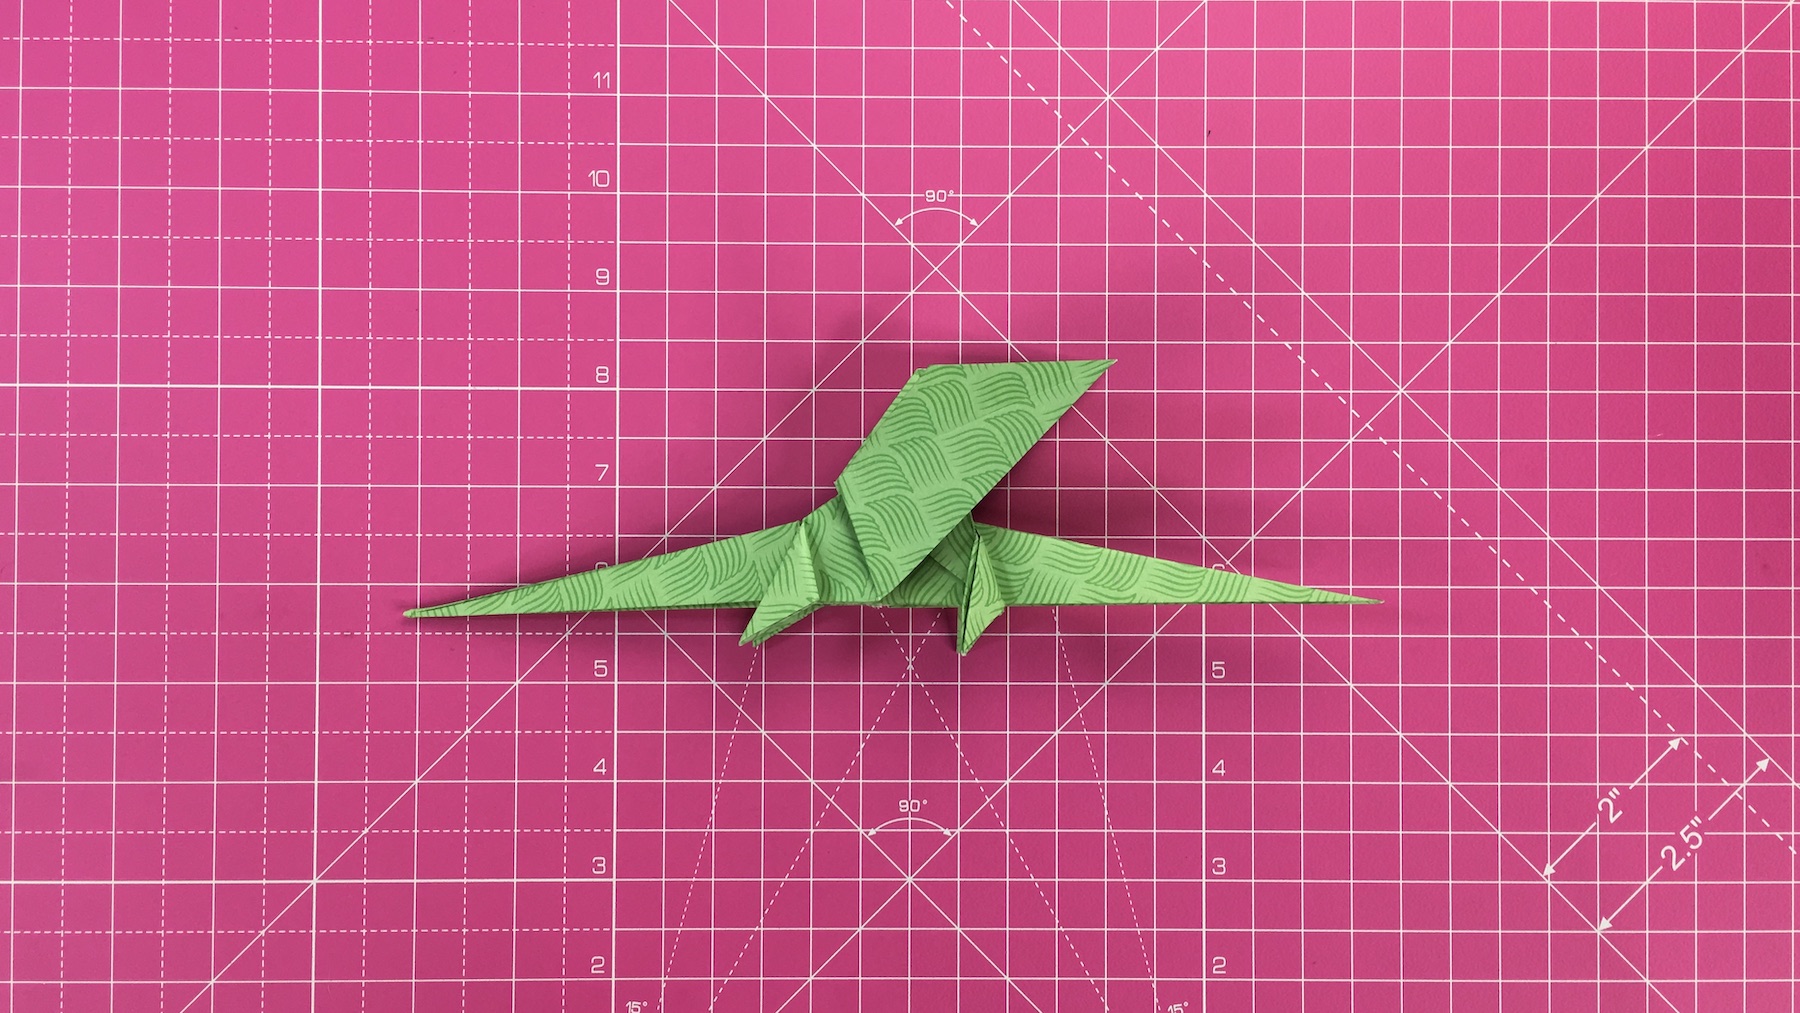 How to make an origami dragon, origami dragon tutorial - step 44